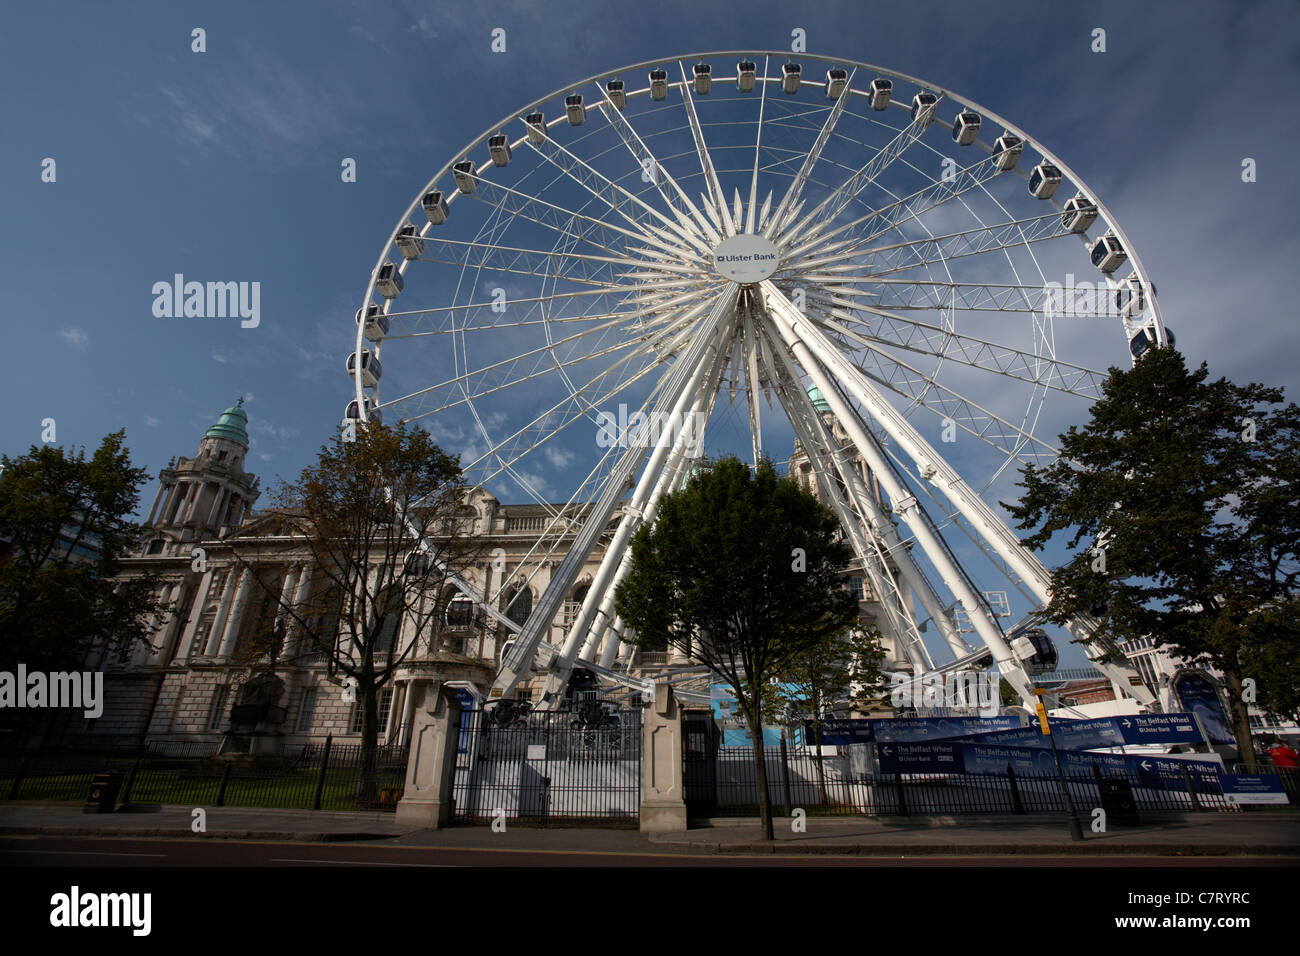 The Big Wheel at Belfast City Hall, Donegall Square, Belfast, Northern Ireland, UK. Stock Photo